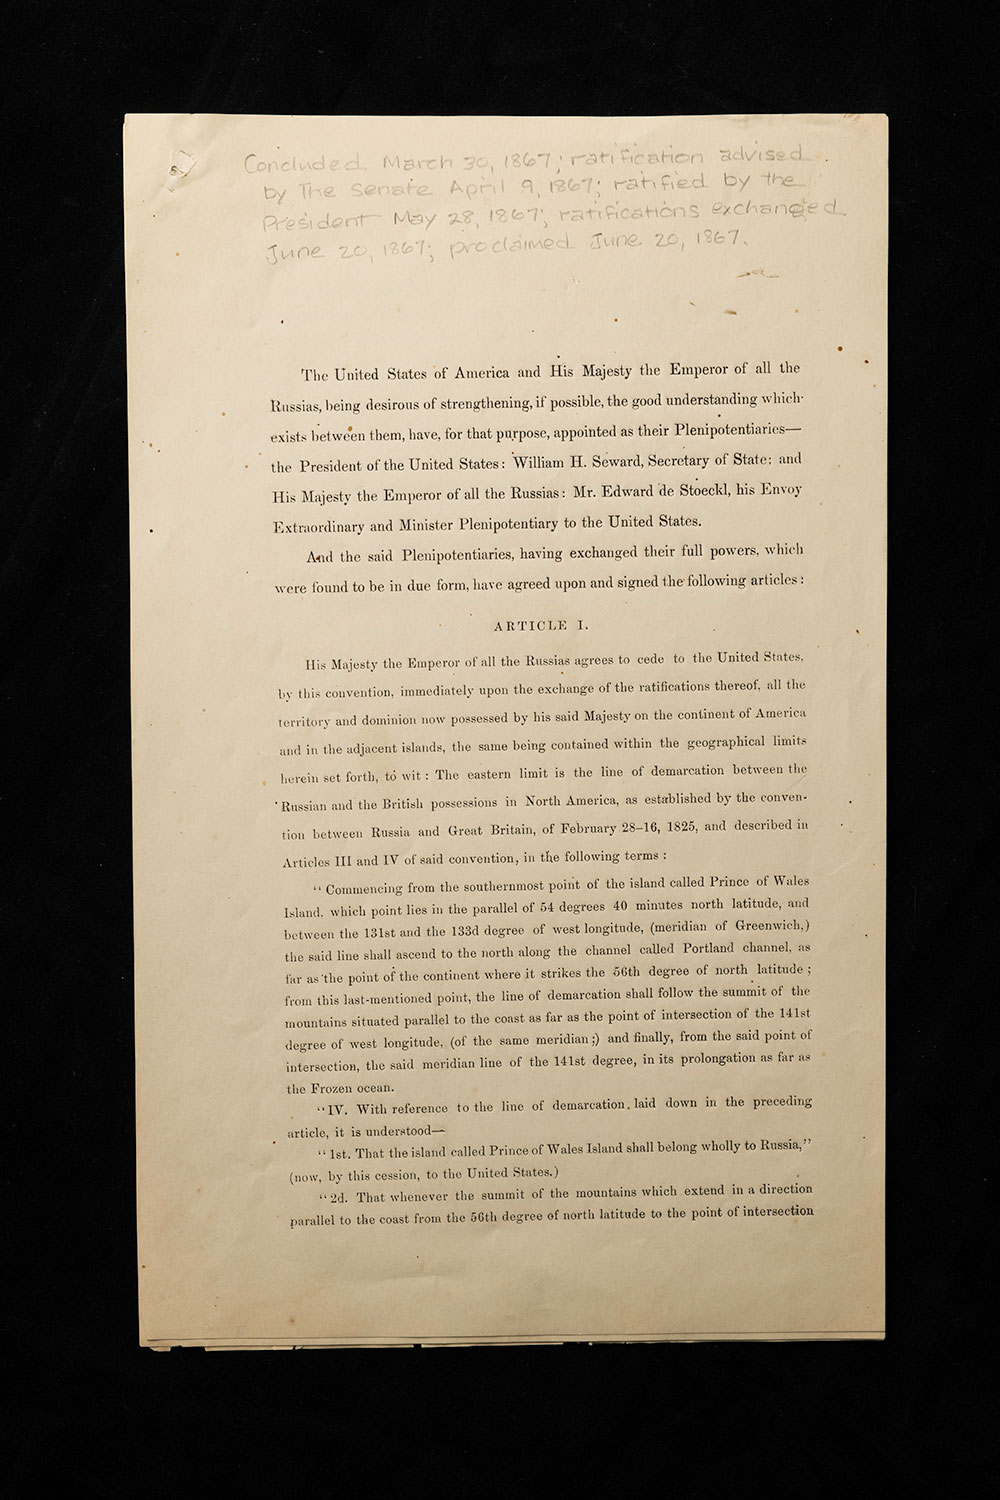 document shows the first page of the treaty between the United States and Russia